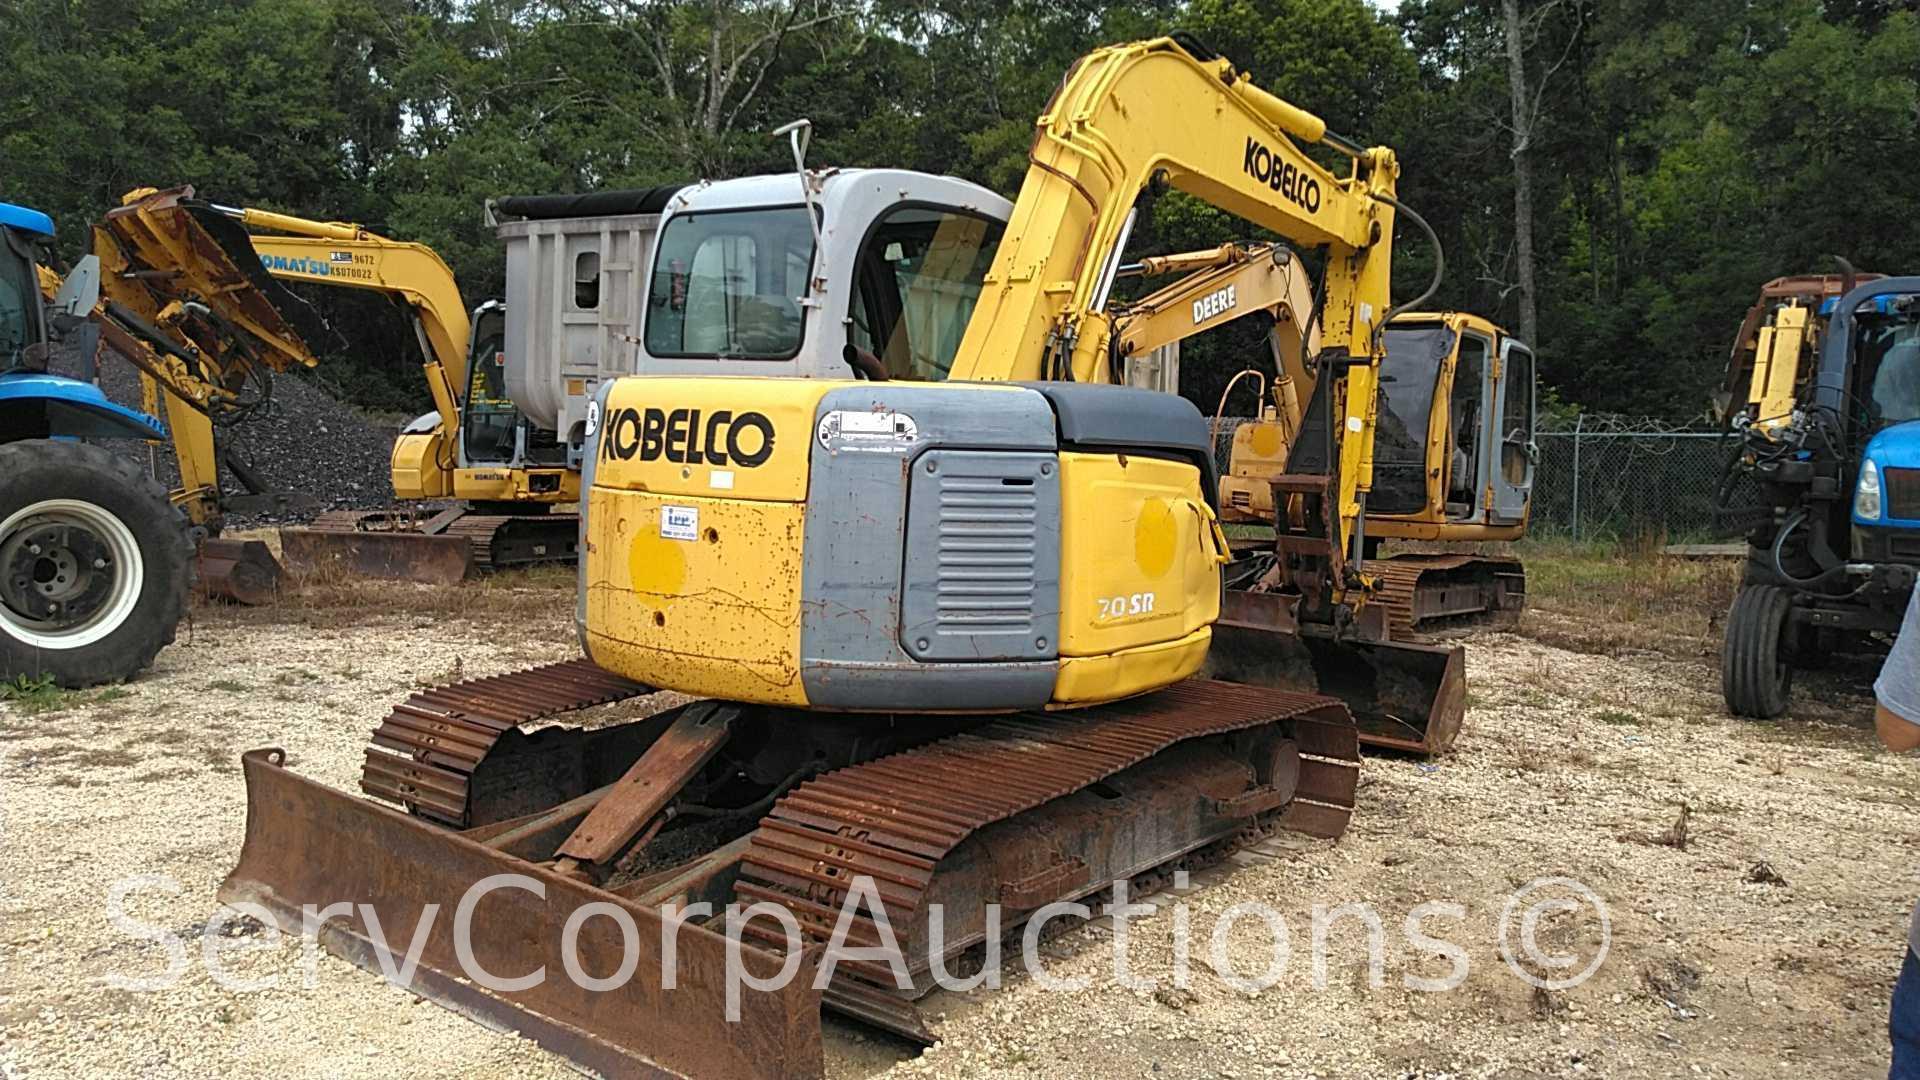 2008 Kobelco 70SR, 5779 Hours, Runs, Does Not Track or Operate, SN: YT04-10543, Unit 77-085 (Located